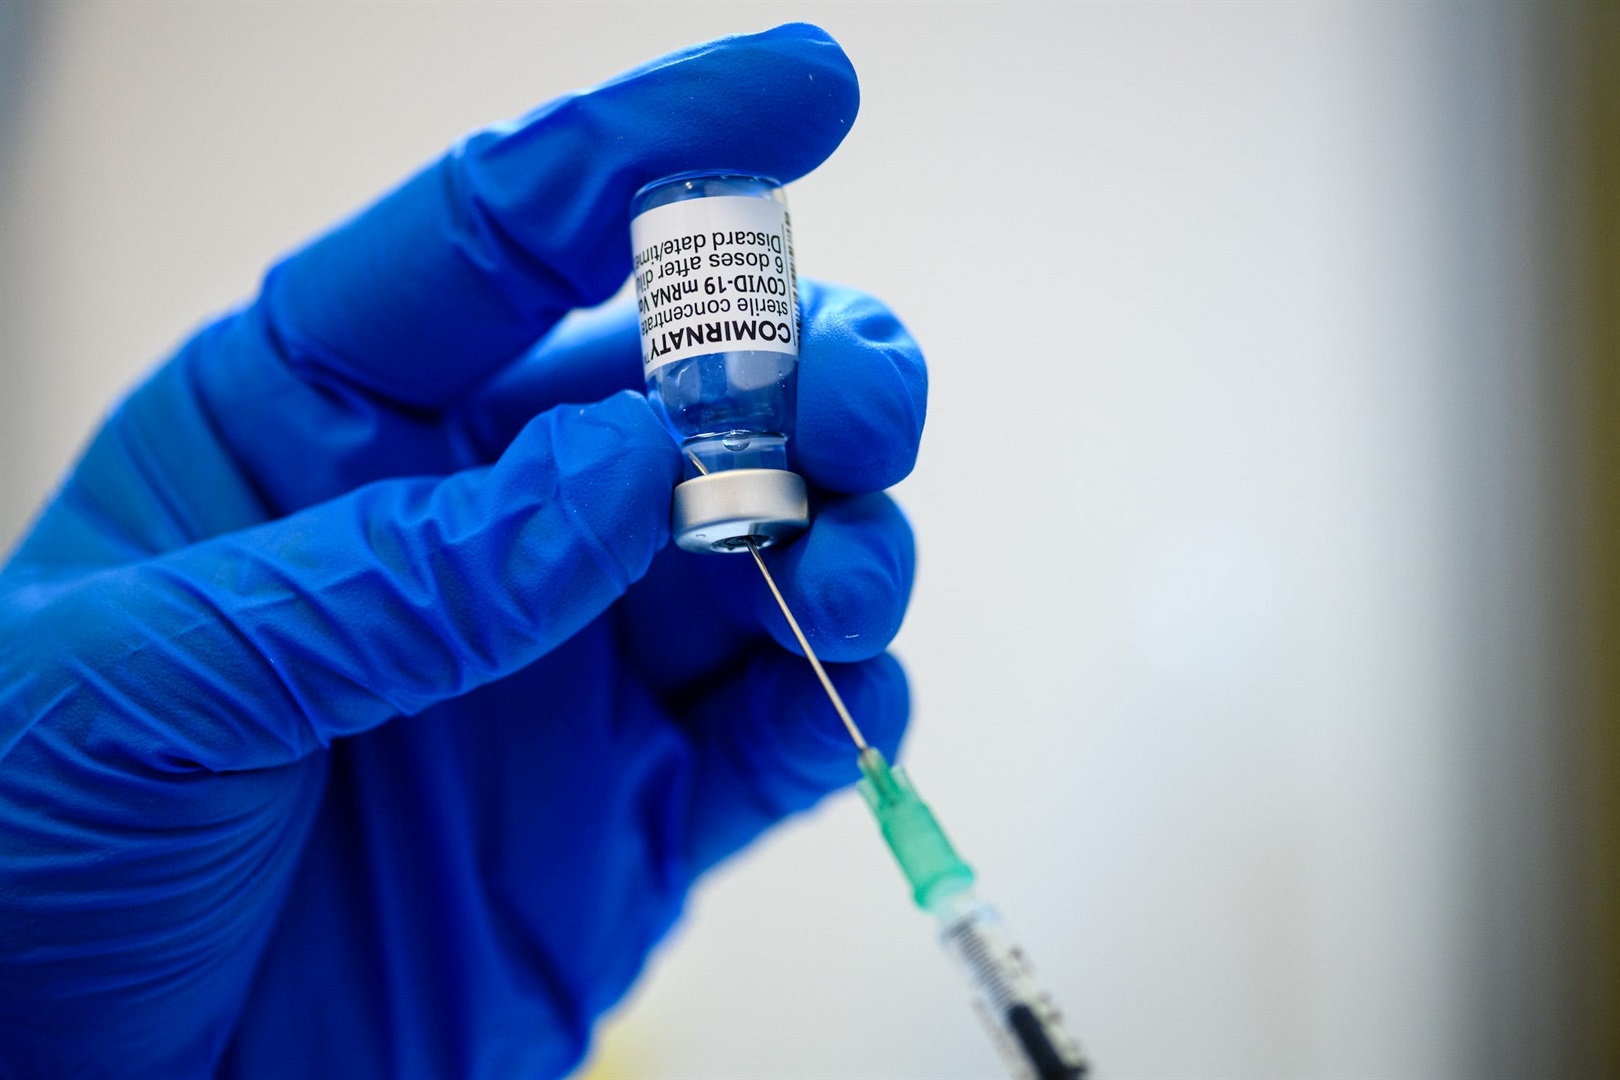 News24.com | EU told to prime for fourth Covid-19 vaccine dose, if needed